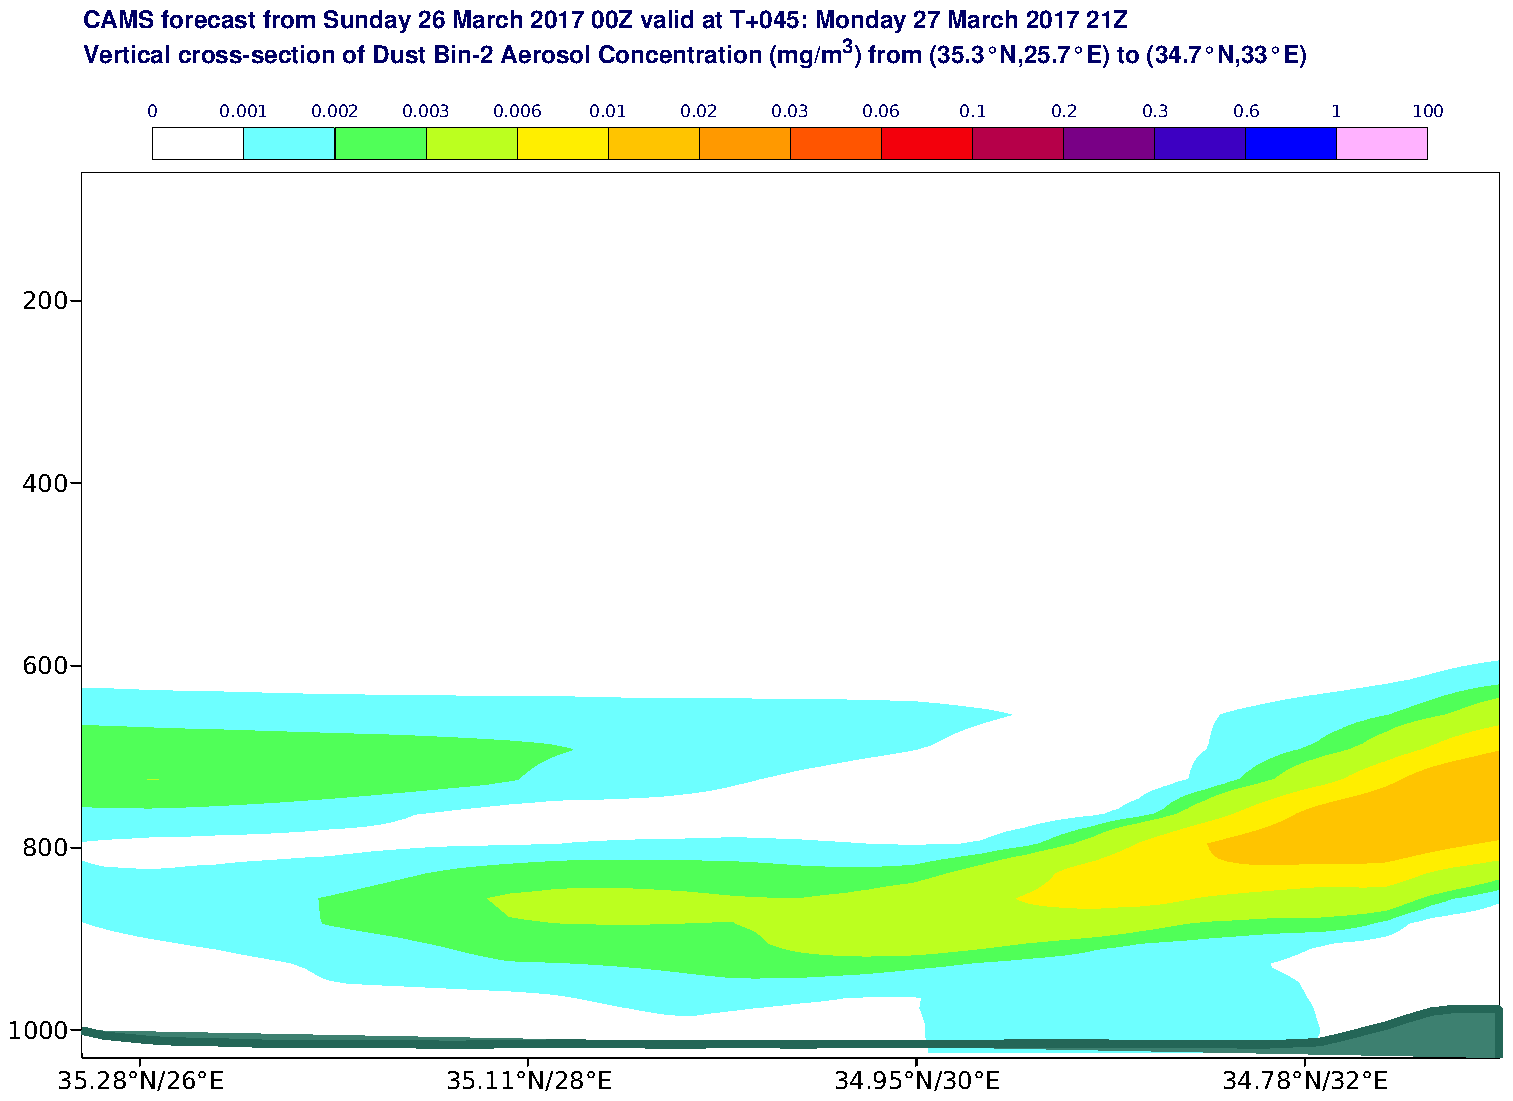 Vertical cross-section of Dust Bin-2 Aerosol Concentration (mg/m3) valid at T45 - 2017-03-27 21:00